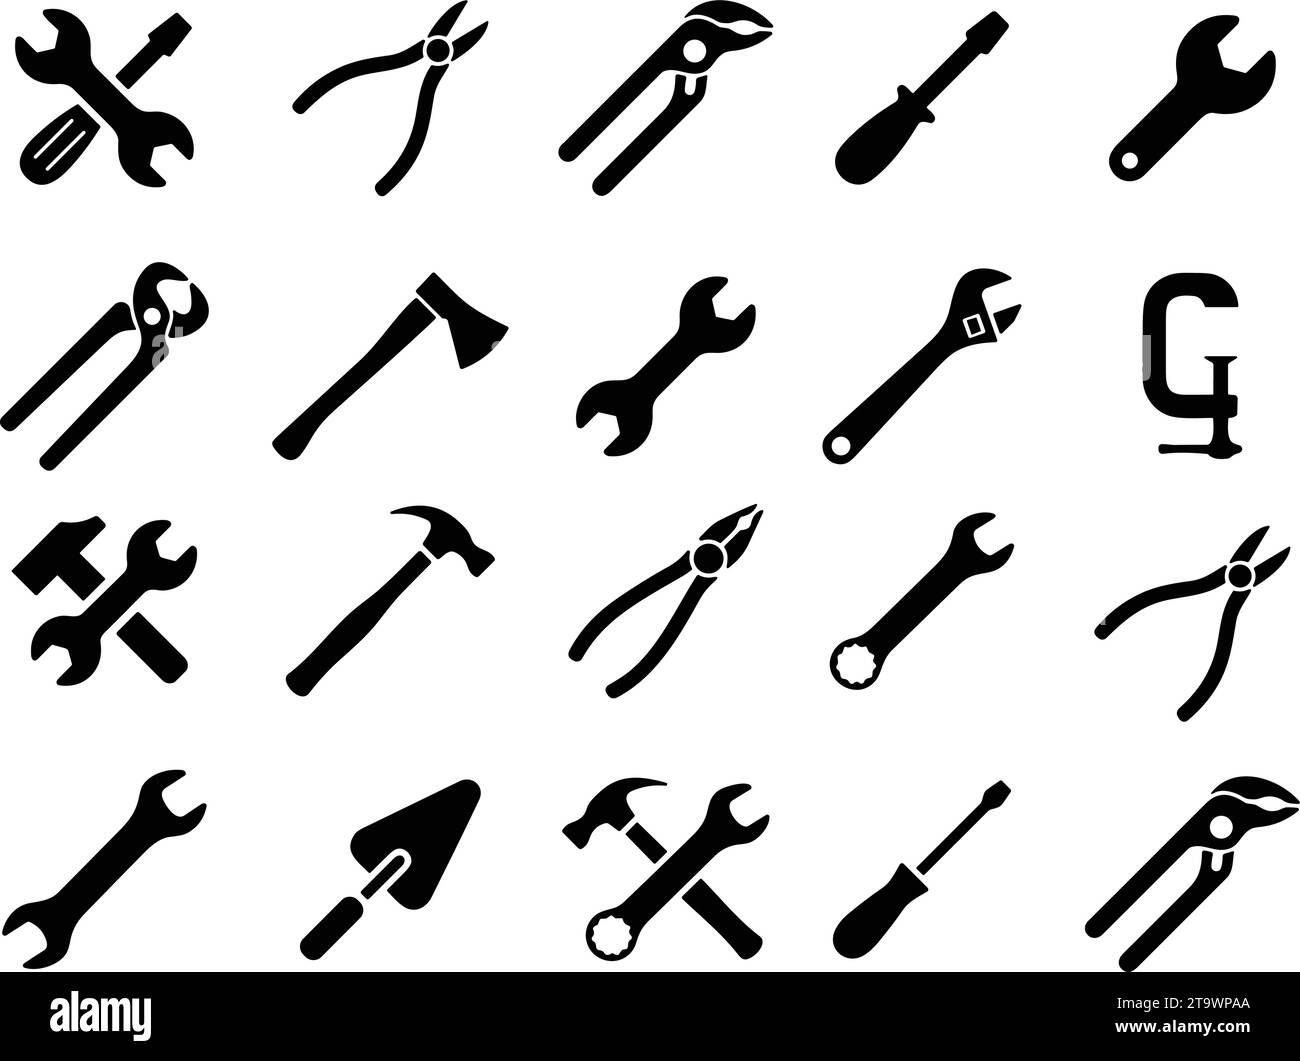 Set of Working Tools Icon. Hammer turn screw tools icon. Instrument collection. Mechanic tool. Construction and repair tools Vector illustration Stock Vector